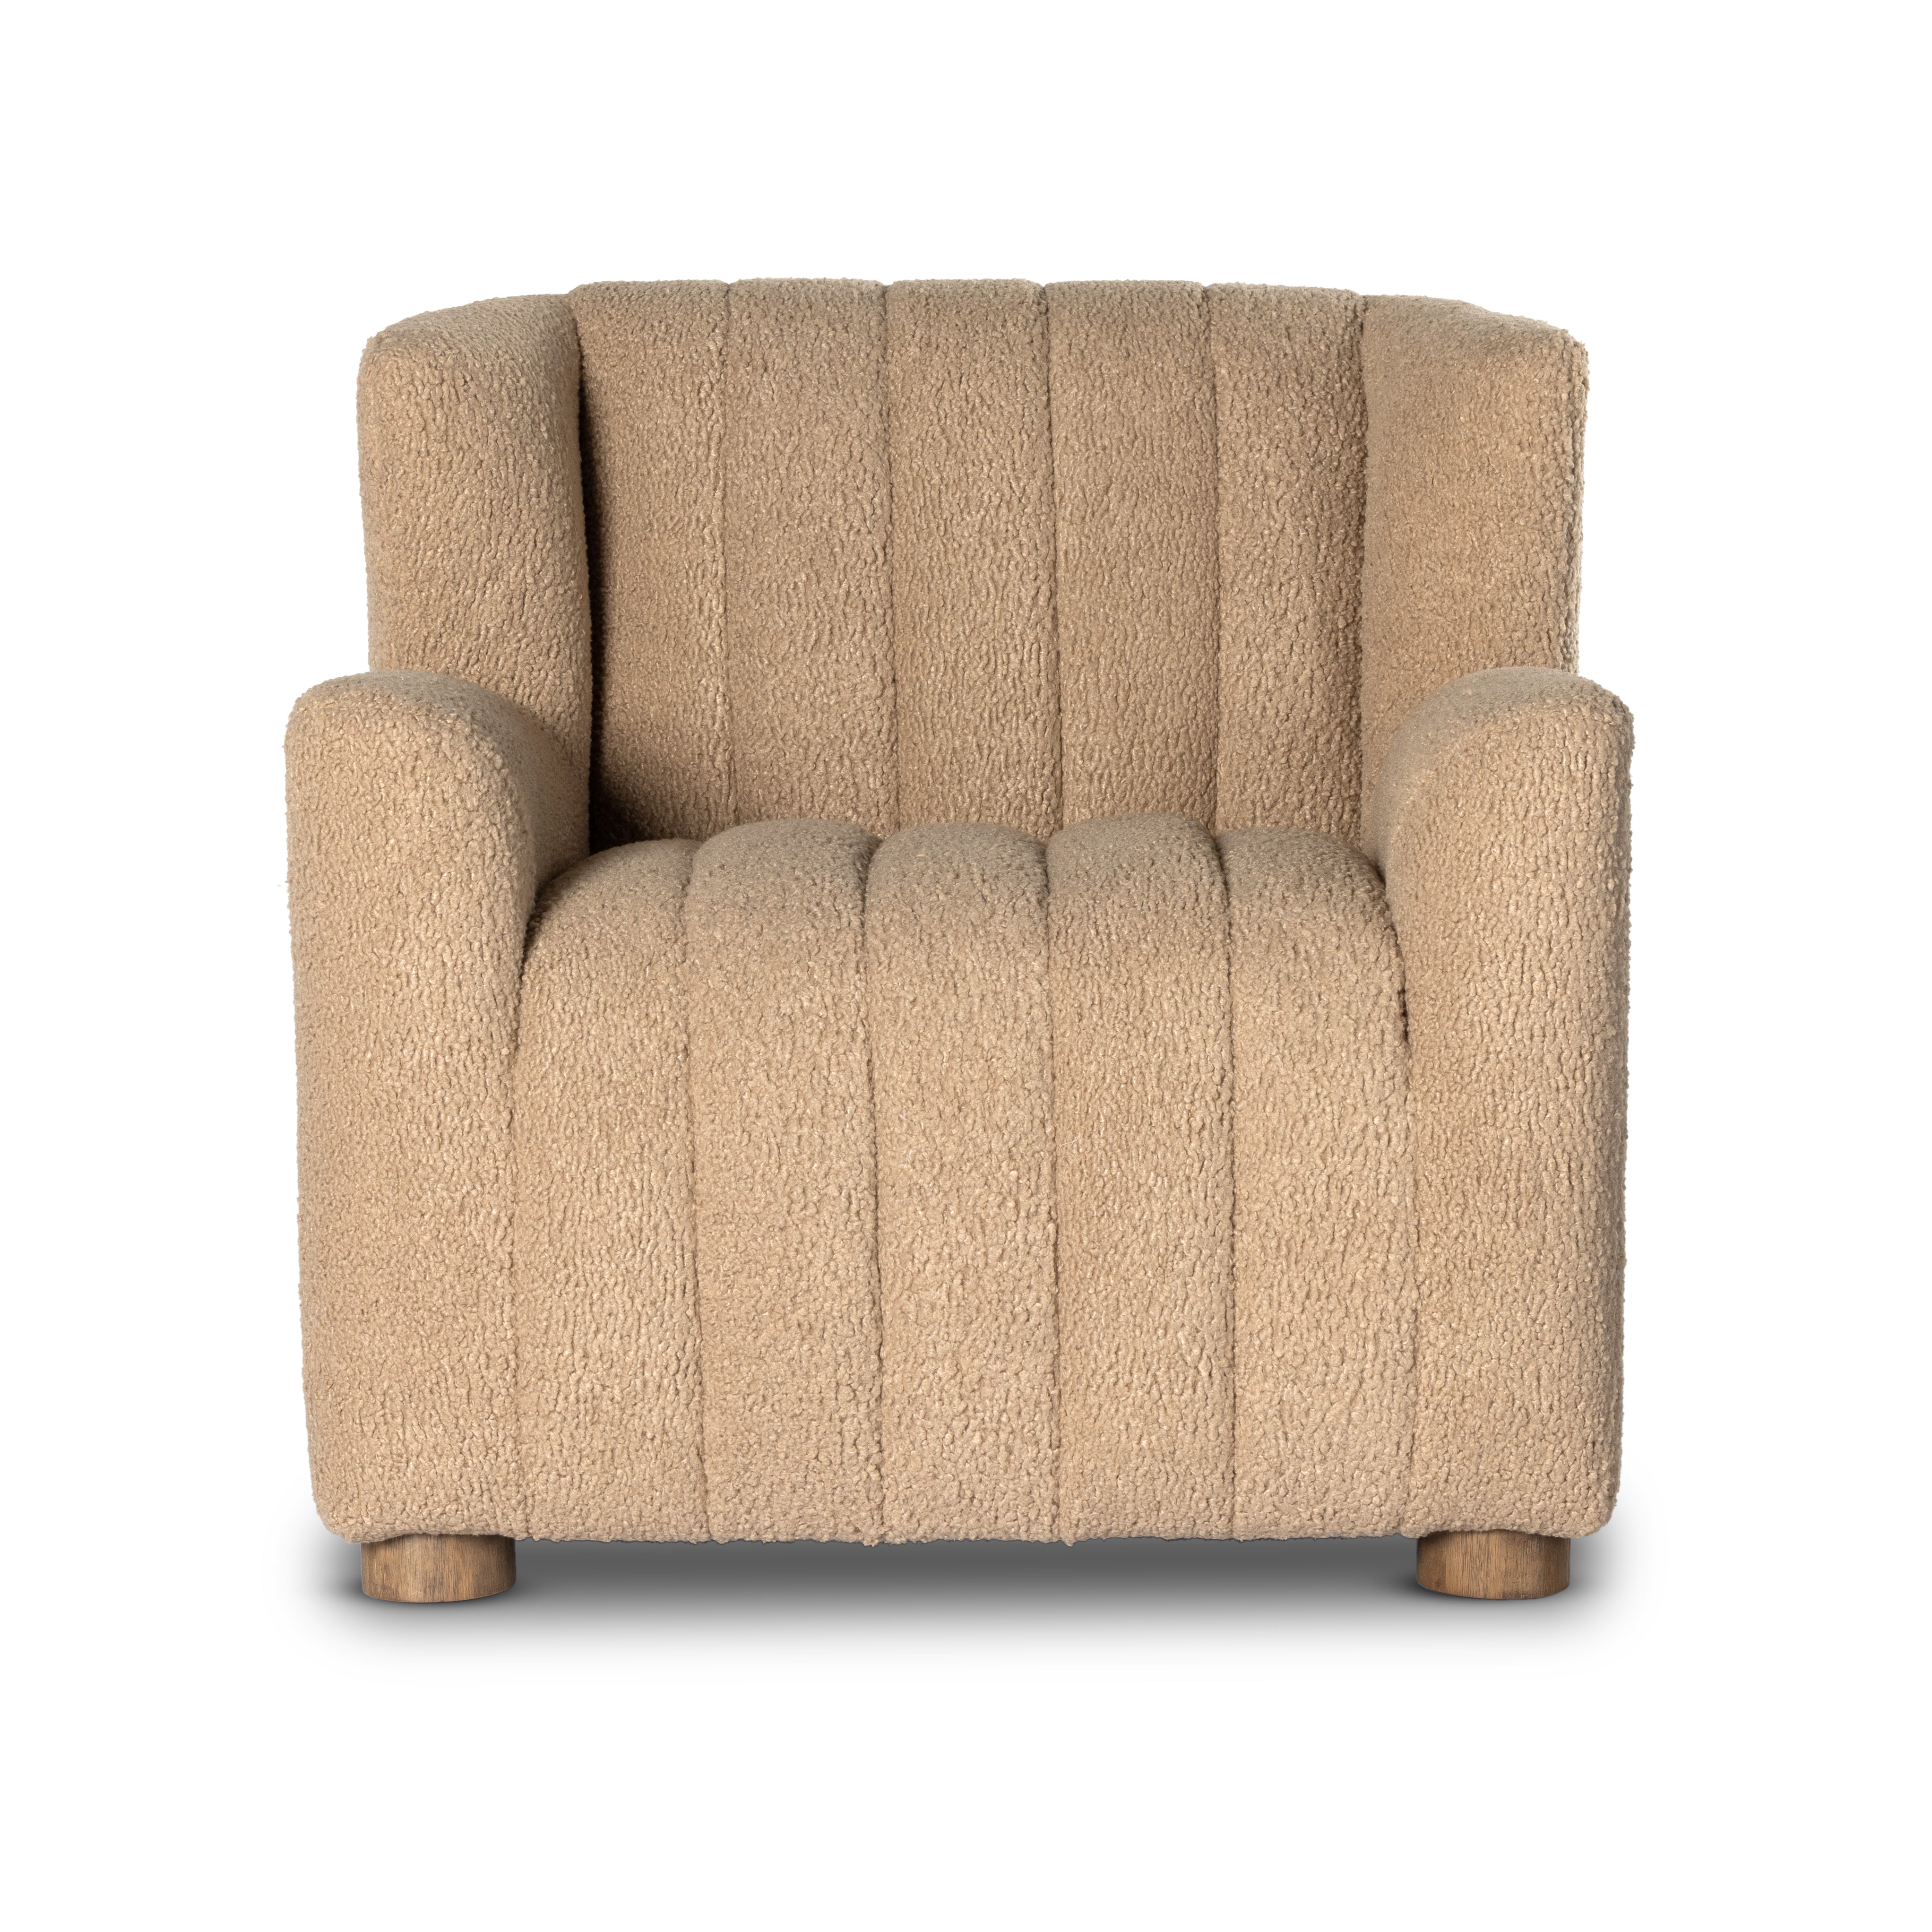 The classic wing-back club chair adopts heavy channeling for an even-comfier sit. Highly textural poly fiber fabric brings this retro lounge-inspired chair up to modern speed. Amethyst Home provides interior design, new construction, custom furniture and area rugs in the Calabasis metro area